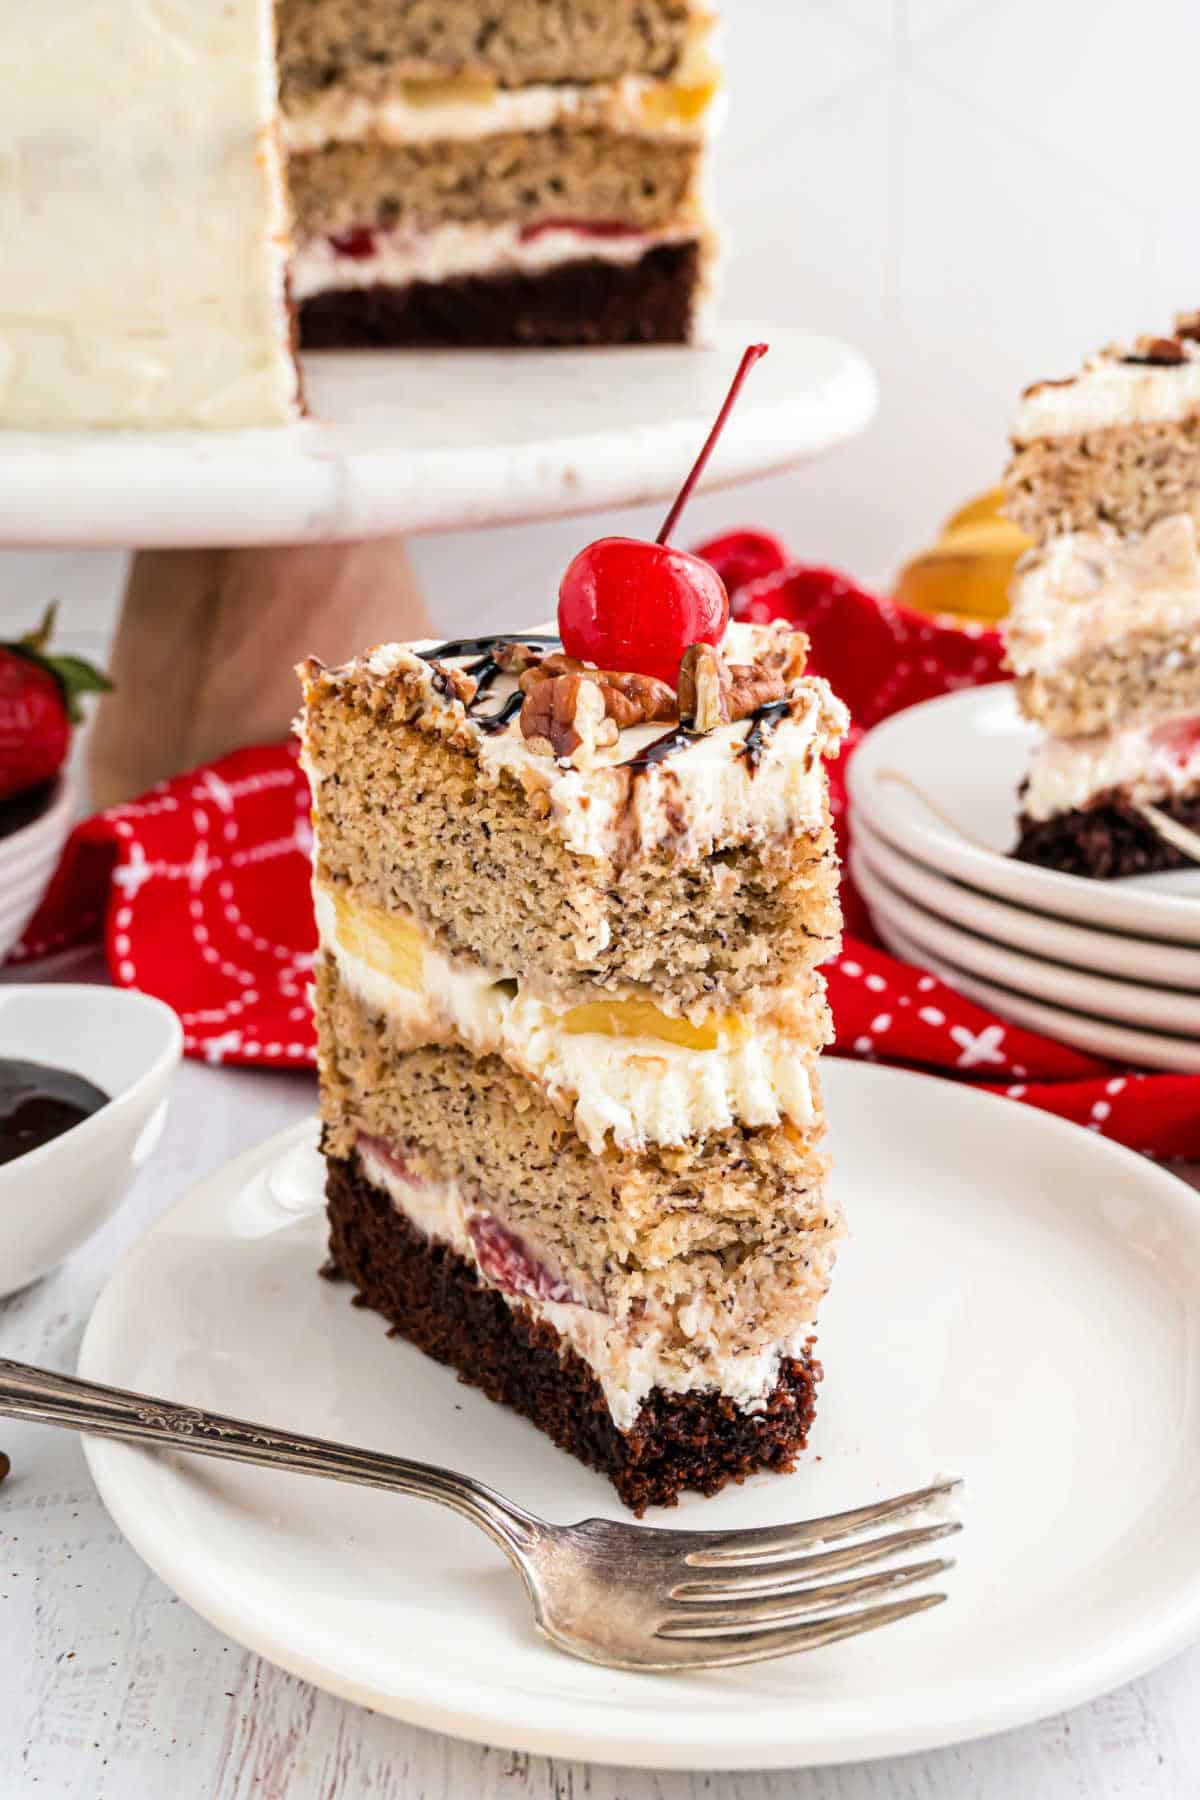 Slice of banana split cake with a bite taken out.